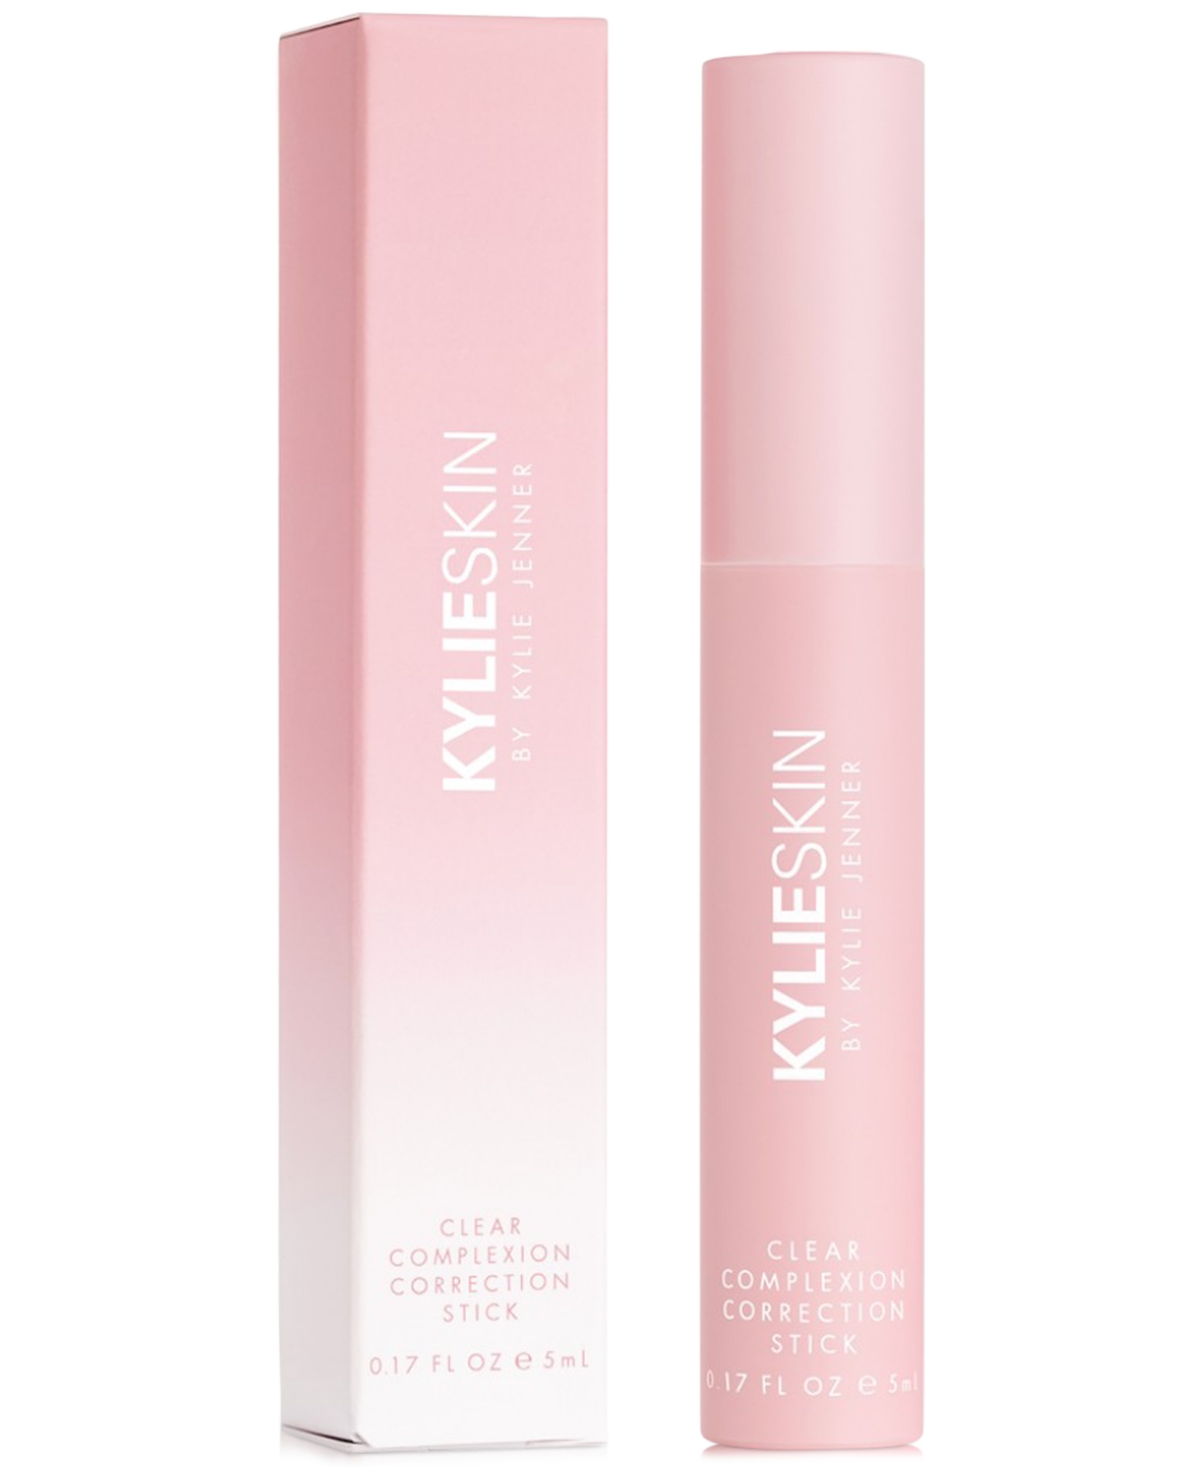 Kylie Cosmetics Clear Complexion Correction Stick